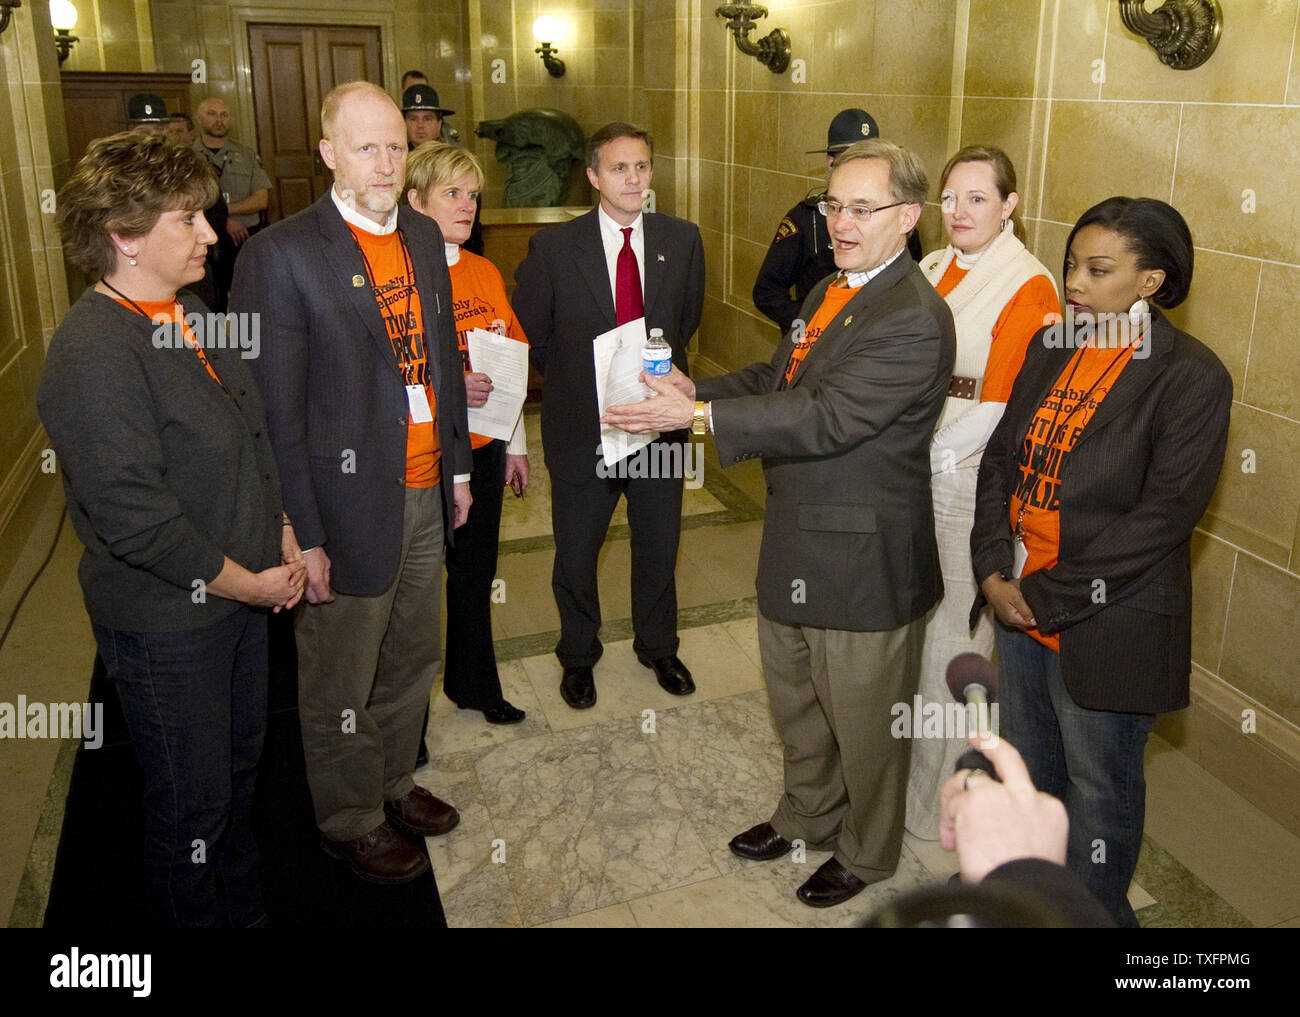 Wisconsin state assembly members lead by Rep. Peter Barca (center right) talks with Administration Secretary Michael Huebsch in front of the Governor's office at the state Capitol in Madison, Wisconsin on February 24, 2011. The lawmakers were requesting a meeting with Republican Gov. Scott Walker.  The state budget proposed by the governor  includes cuts in benefits for state workers and takes away many of their collective bargaining rights.     UPI/Brian Kersey Stock Photo